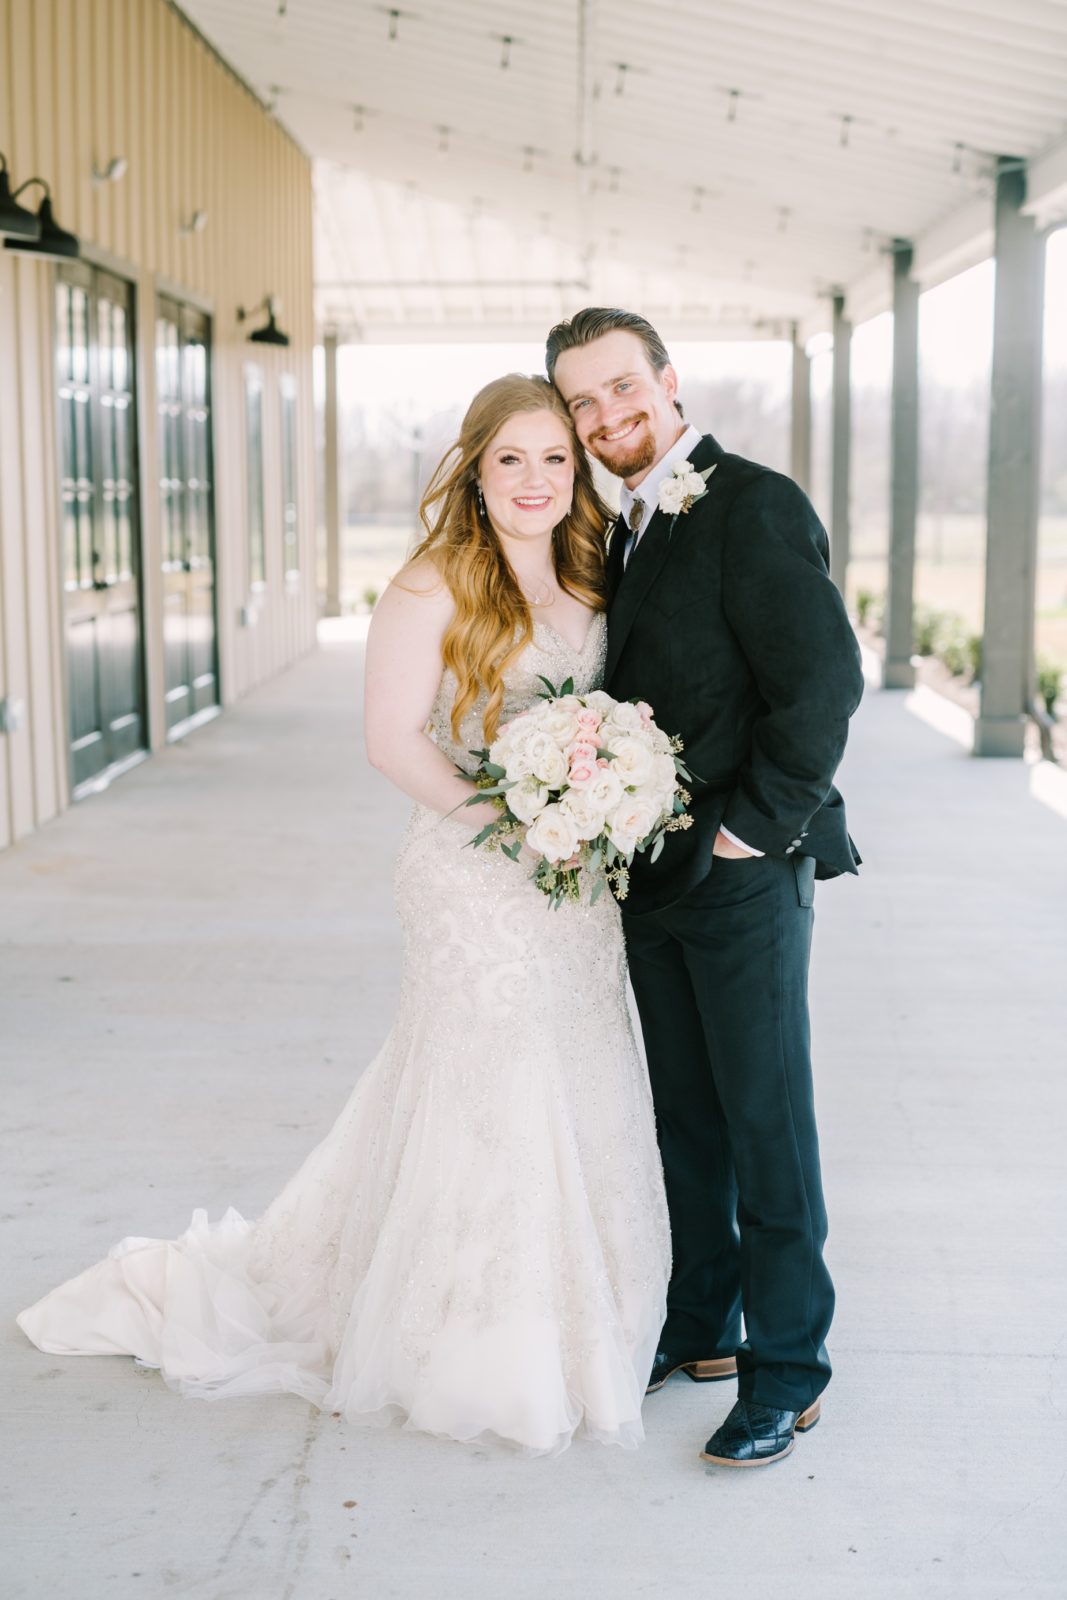 Portrait of a bride and groom next to a barn at Still Waters Ranch by Christina Elliott Photography. black suit barn wedding #ChristinaElliottPhotography #ChristinaElliottWeddings #StillWatersRanchWedding #Texasweddings #countrywedding #ranchwedding